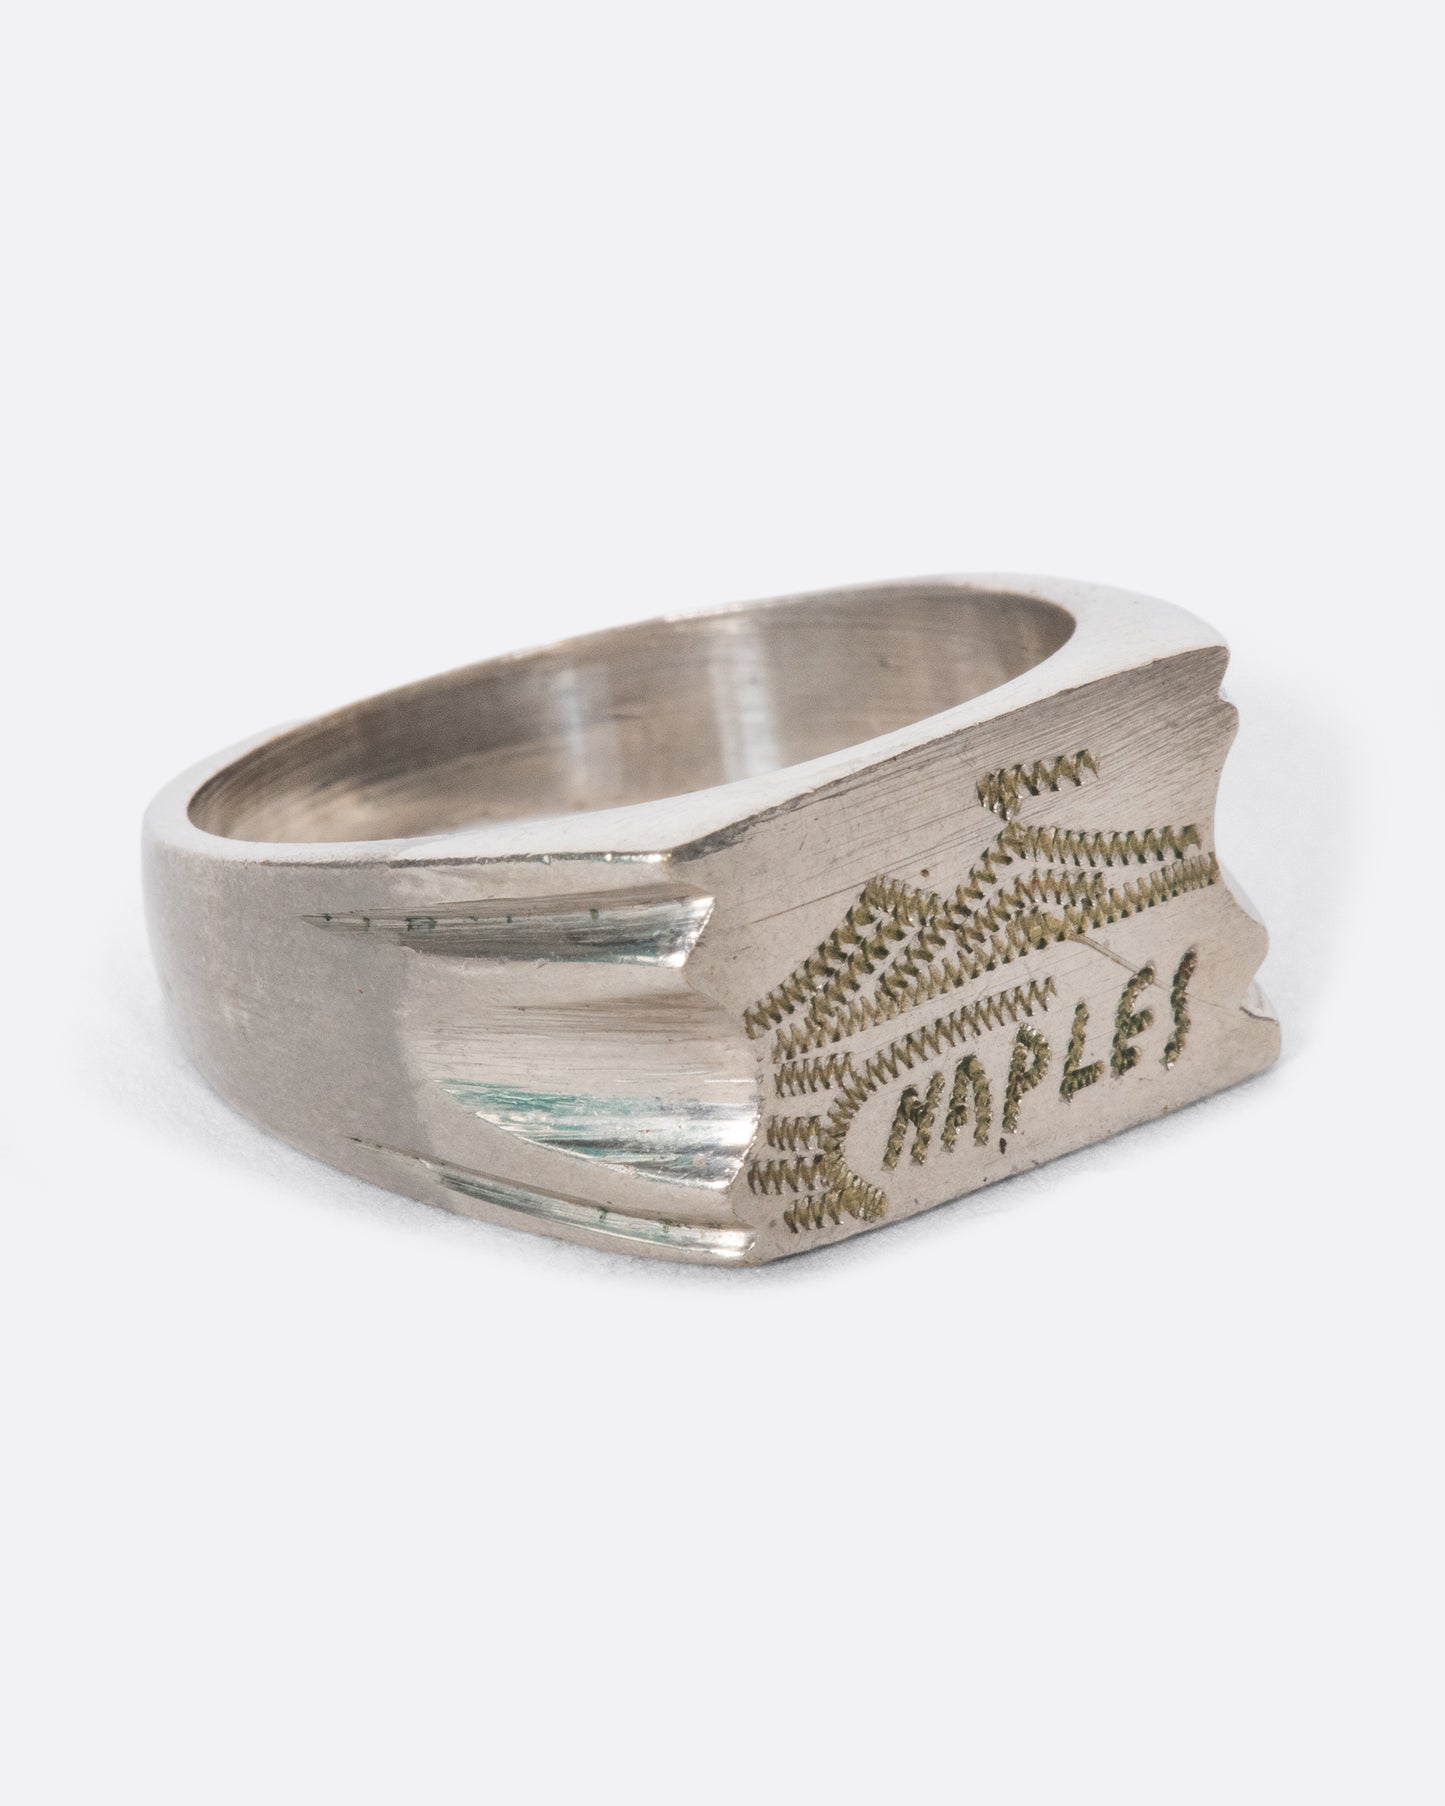 This vintage WWII-era white metal ring is a trench art treasure, depicting a smoking Mount Vesiuvious watching over the Gulf of Naples.